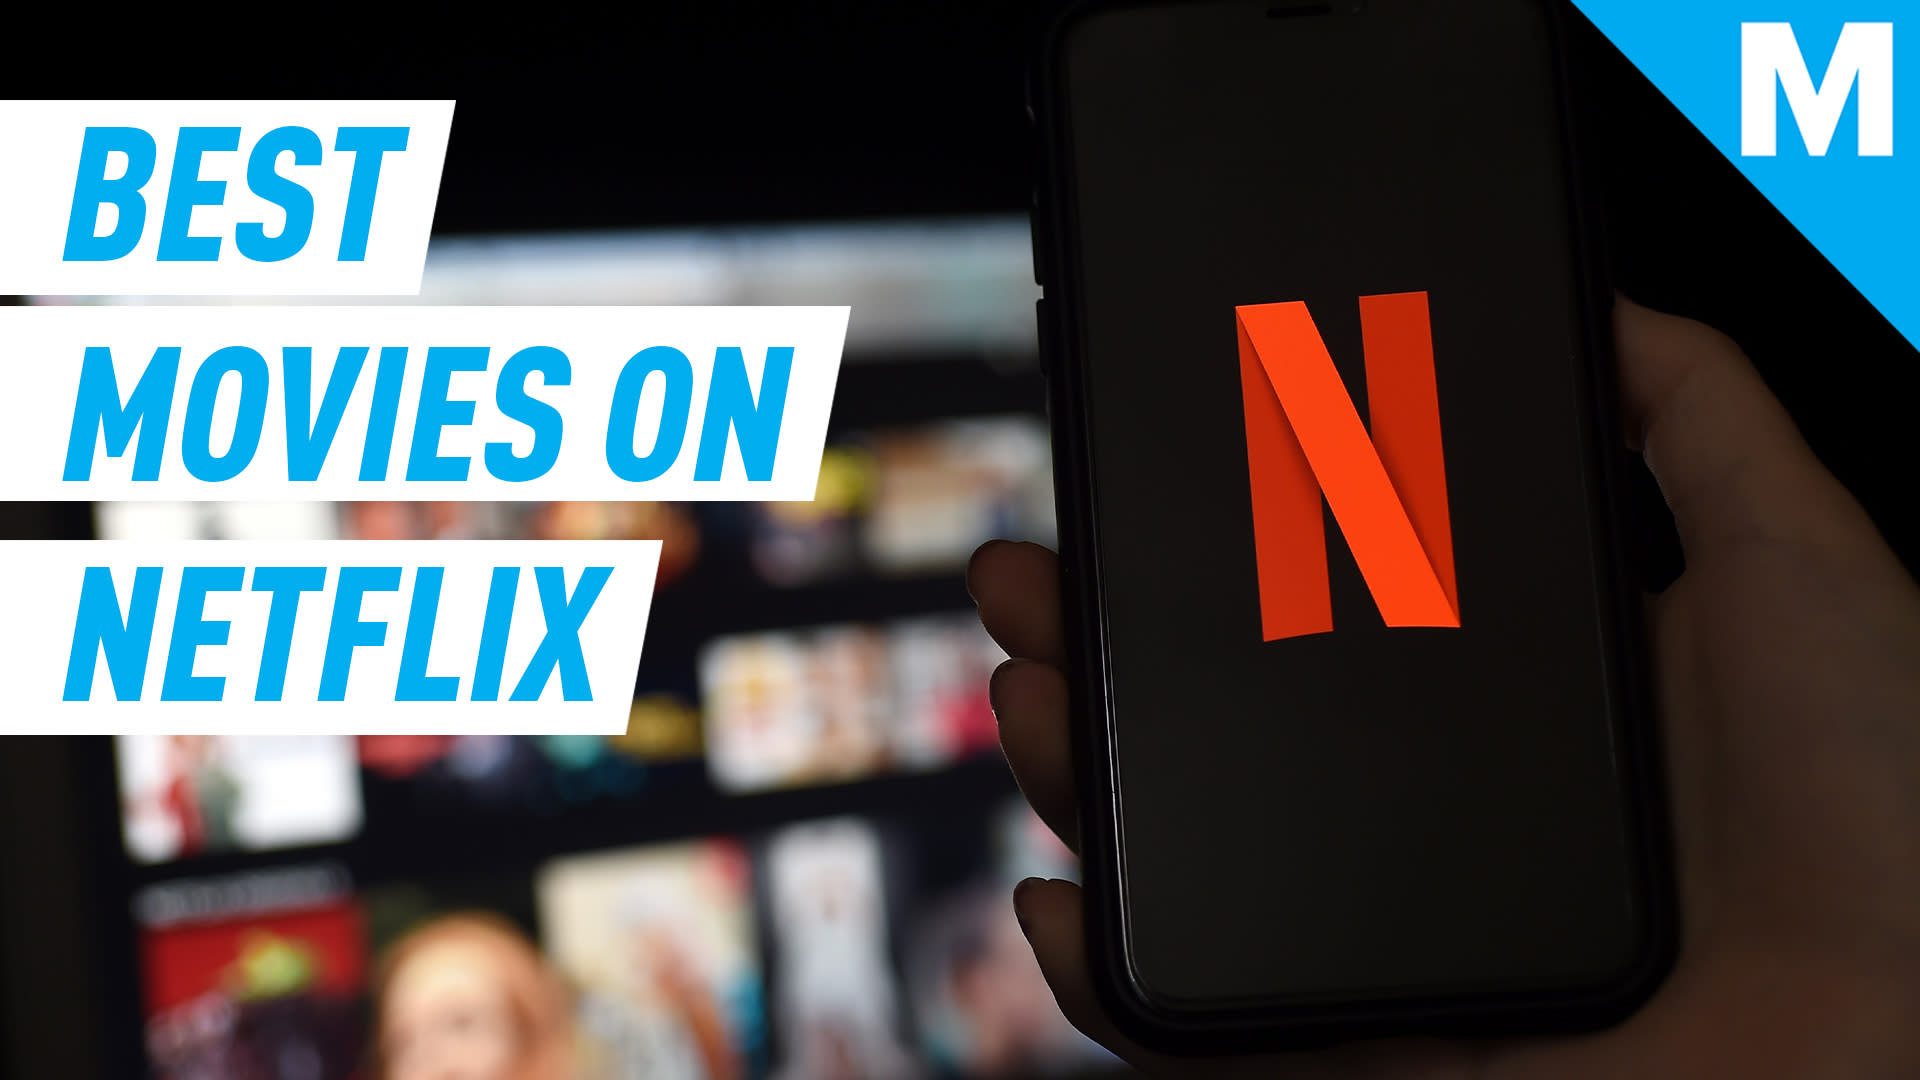 Here are some of the best movies to watch on Netflix [Video]